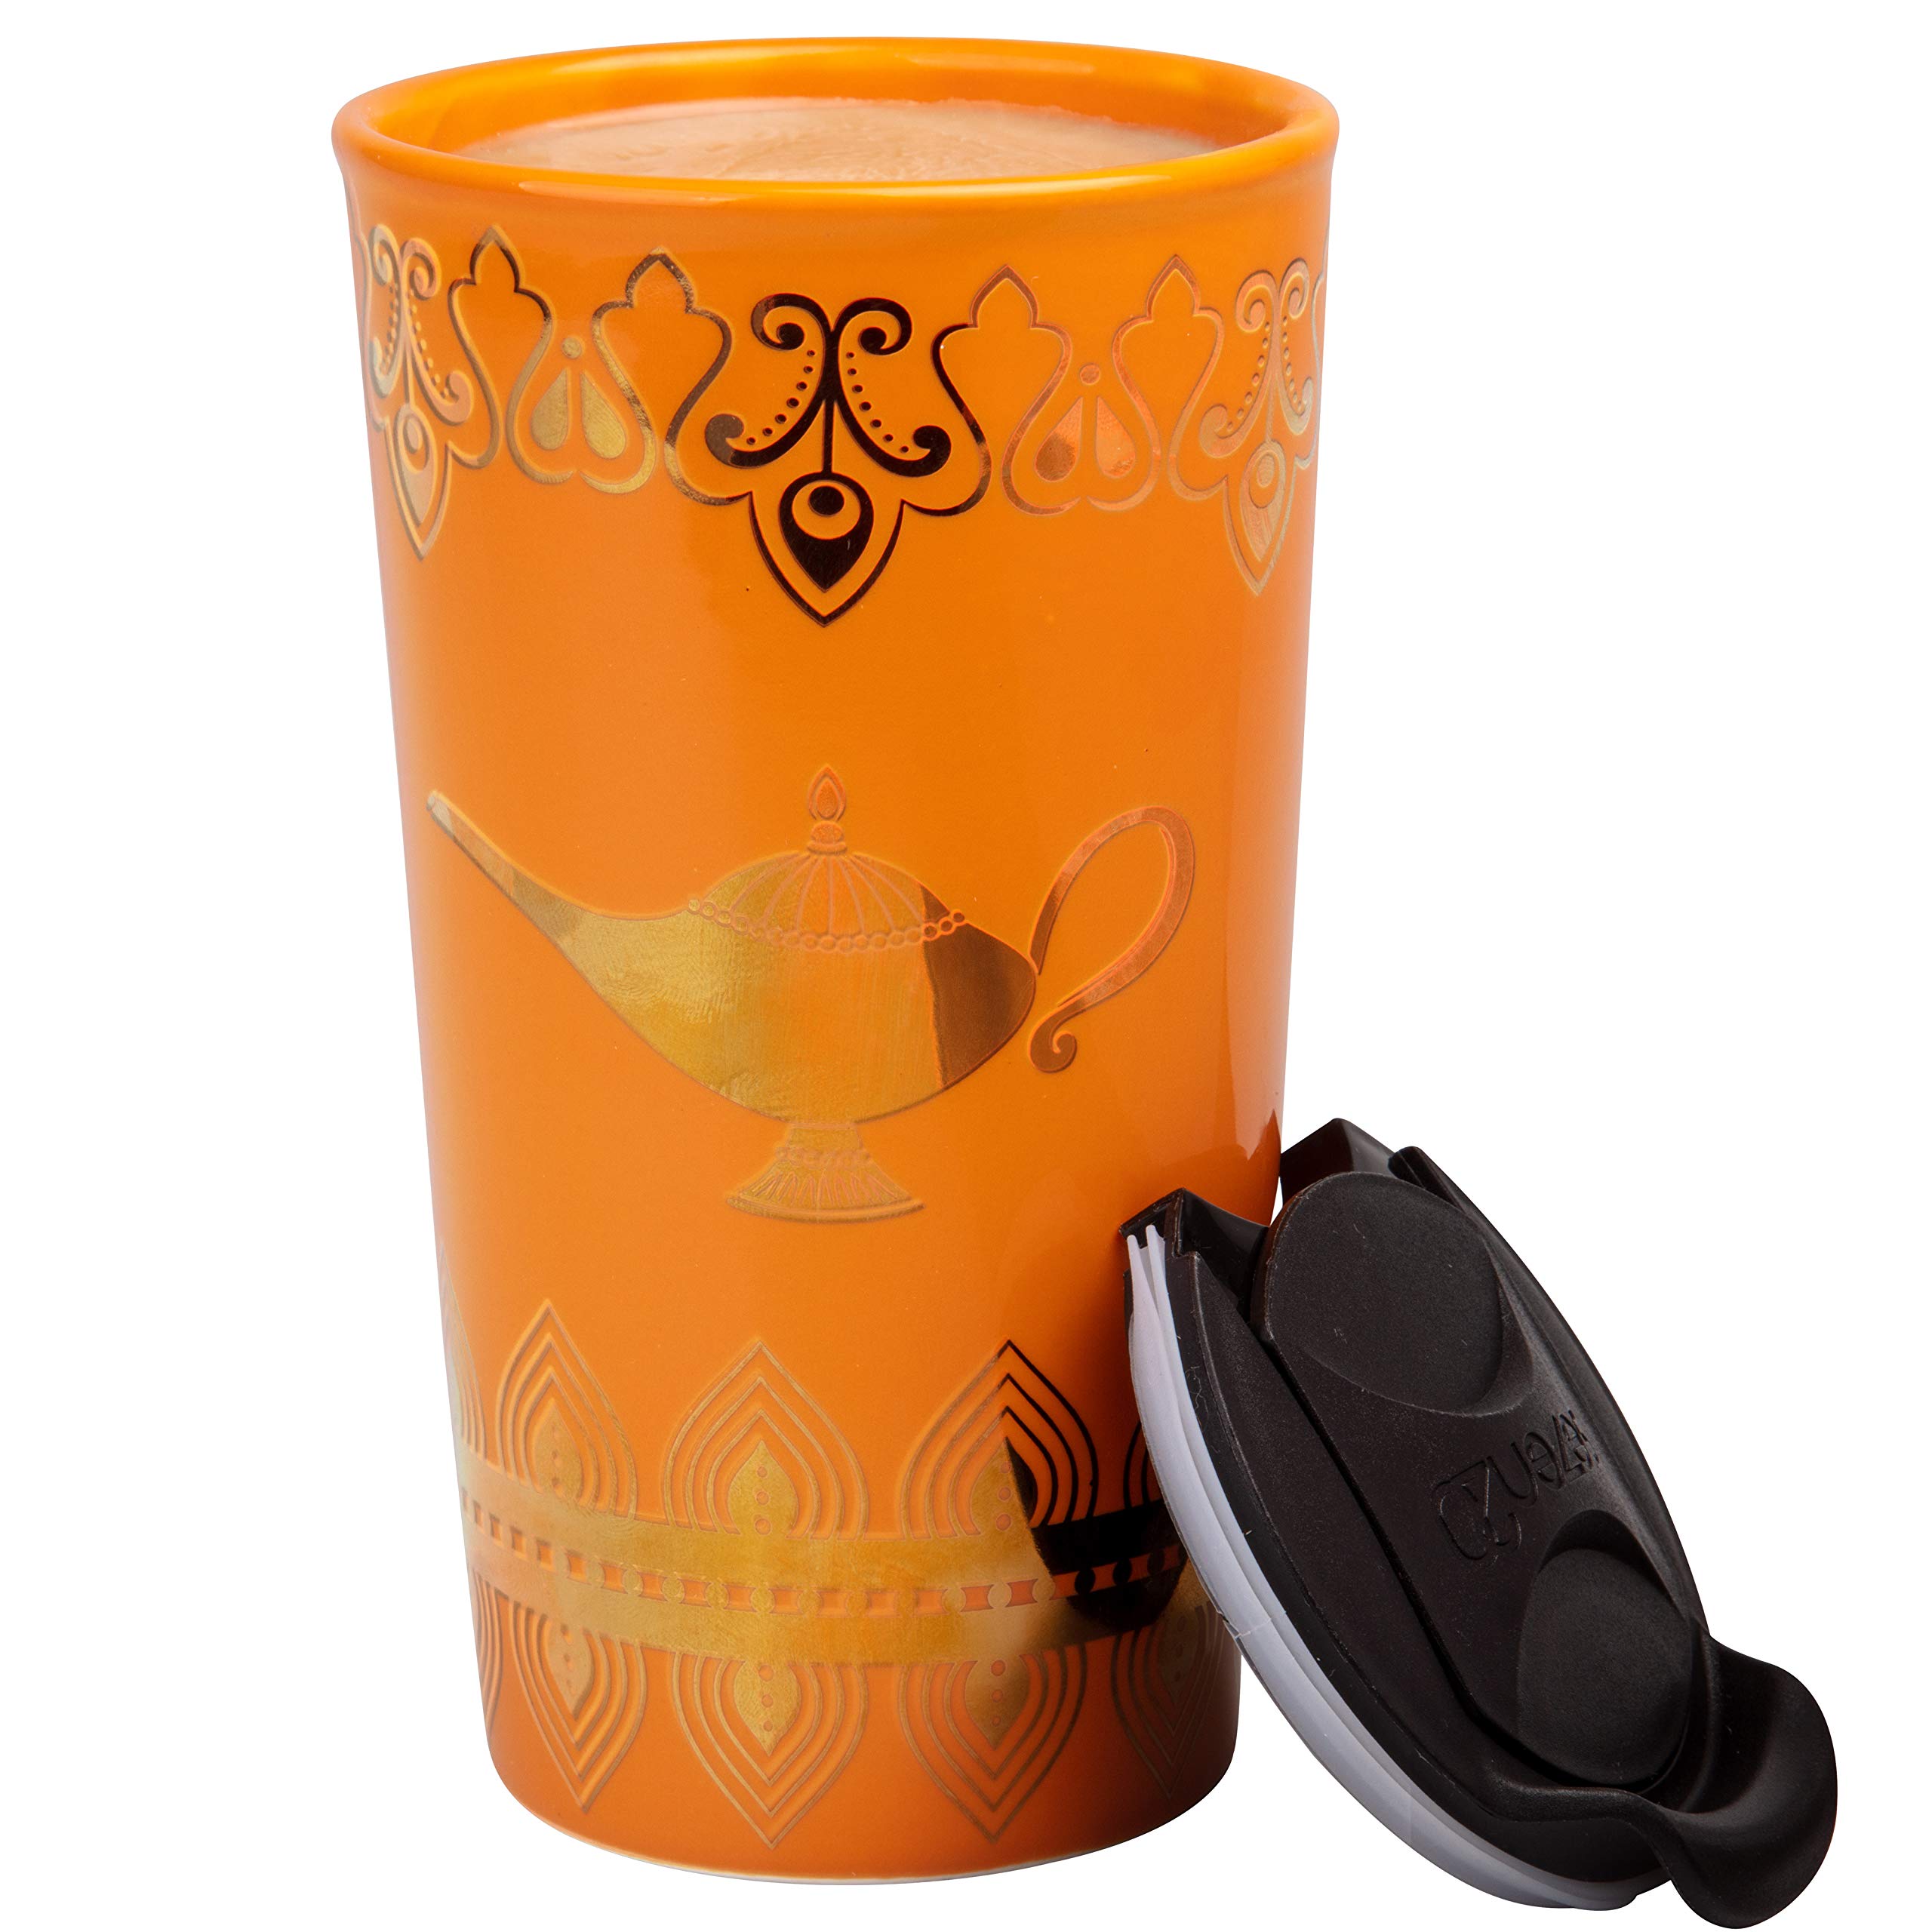 Disney Aladdin Travel Coffee Mug, 16oz - Insulated, Ceramic To-Go Cup with Lid - Gold Genie Lamp & Make A Wish Design - Gift for Teen, Adults & Mothers Day